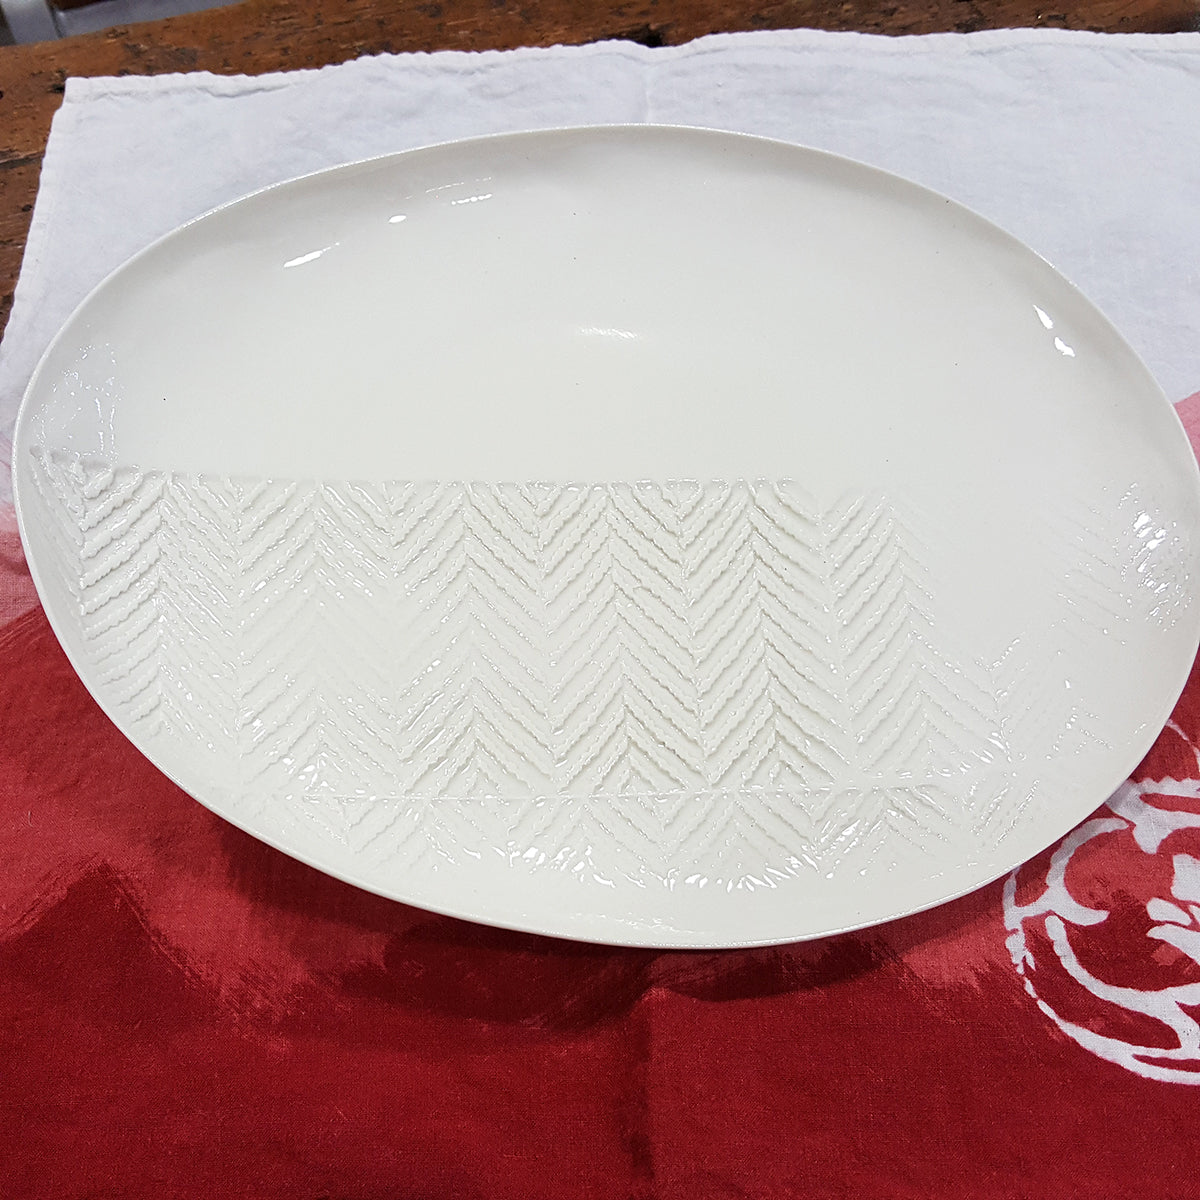 Oval plate in white porcelain with chevron imprint